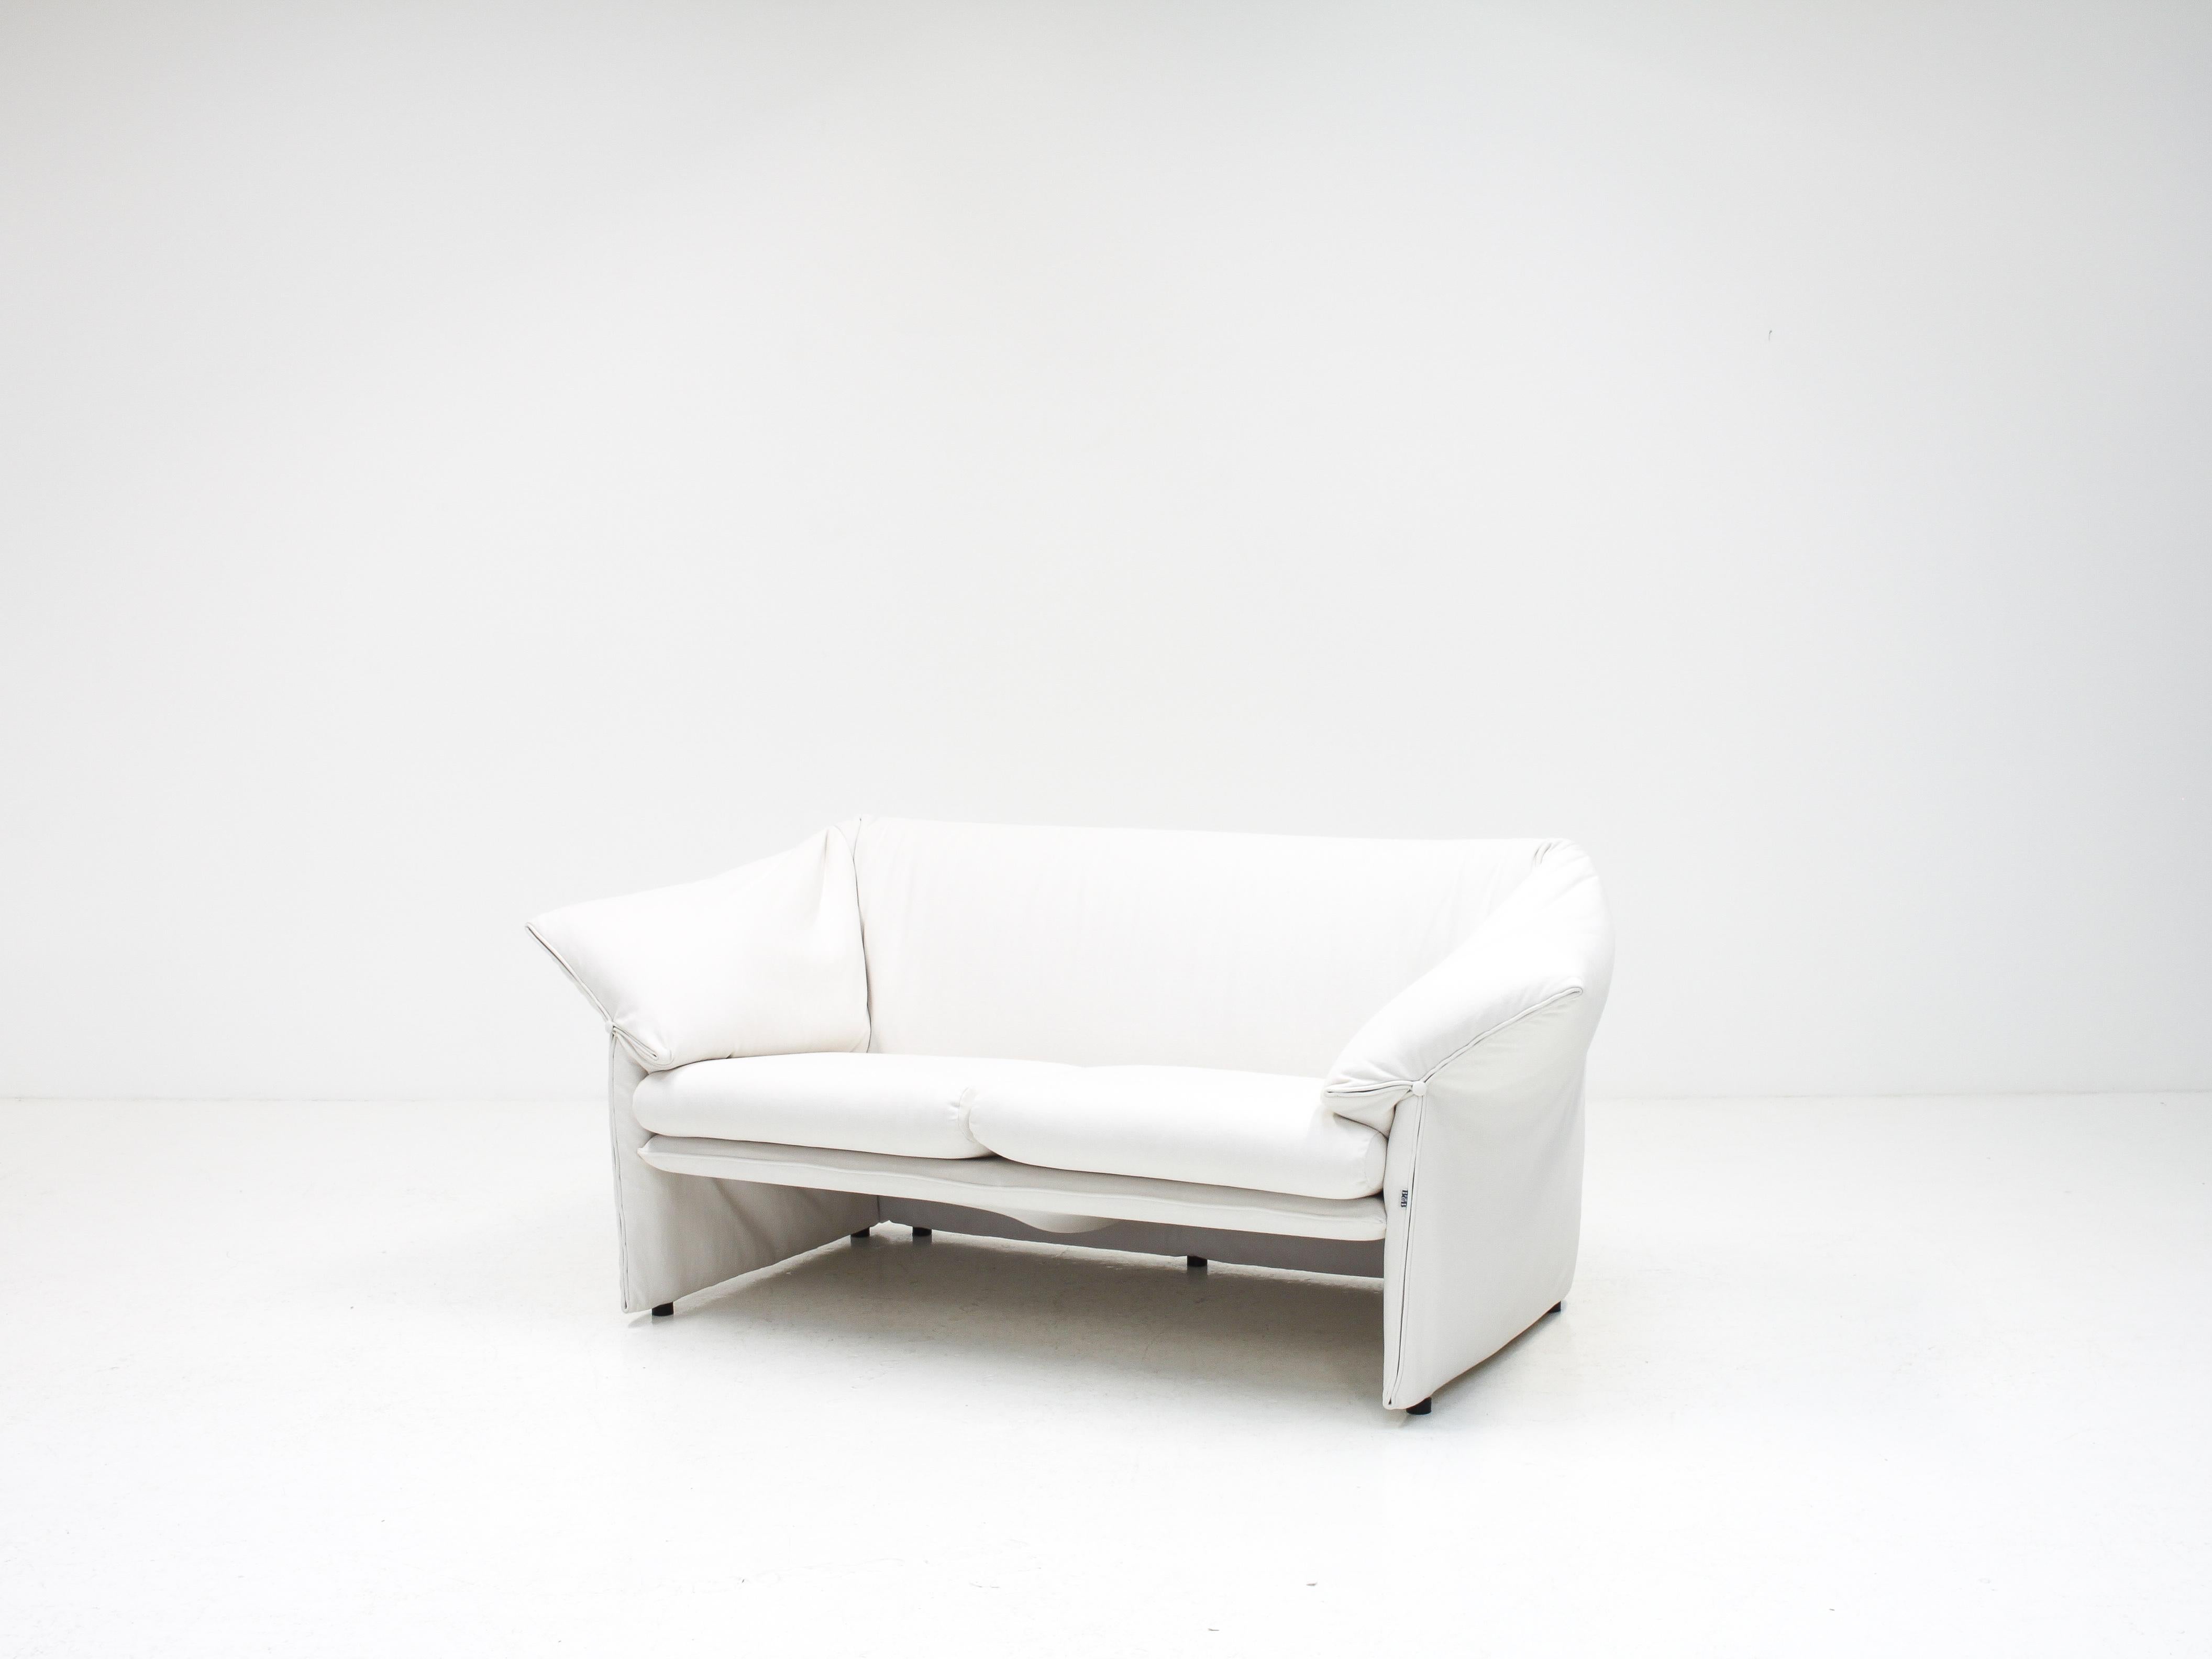 A beautiful example of a two-seat 'Le Stelle' loveseat sofa by Mario Bellini for B&B Italia, designed in 1974. Reupholstered in fresh, white linen.

The piece retains its original labels and is also signed with a B&B tag on the front seam.

An early